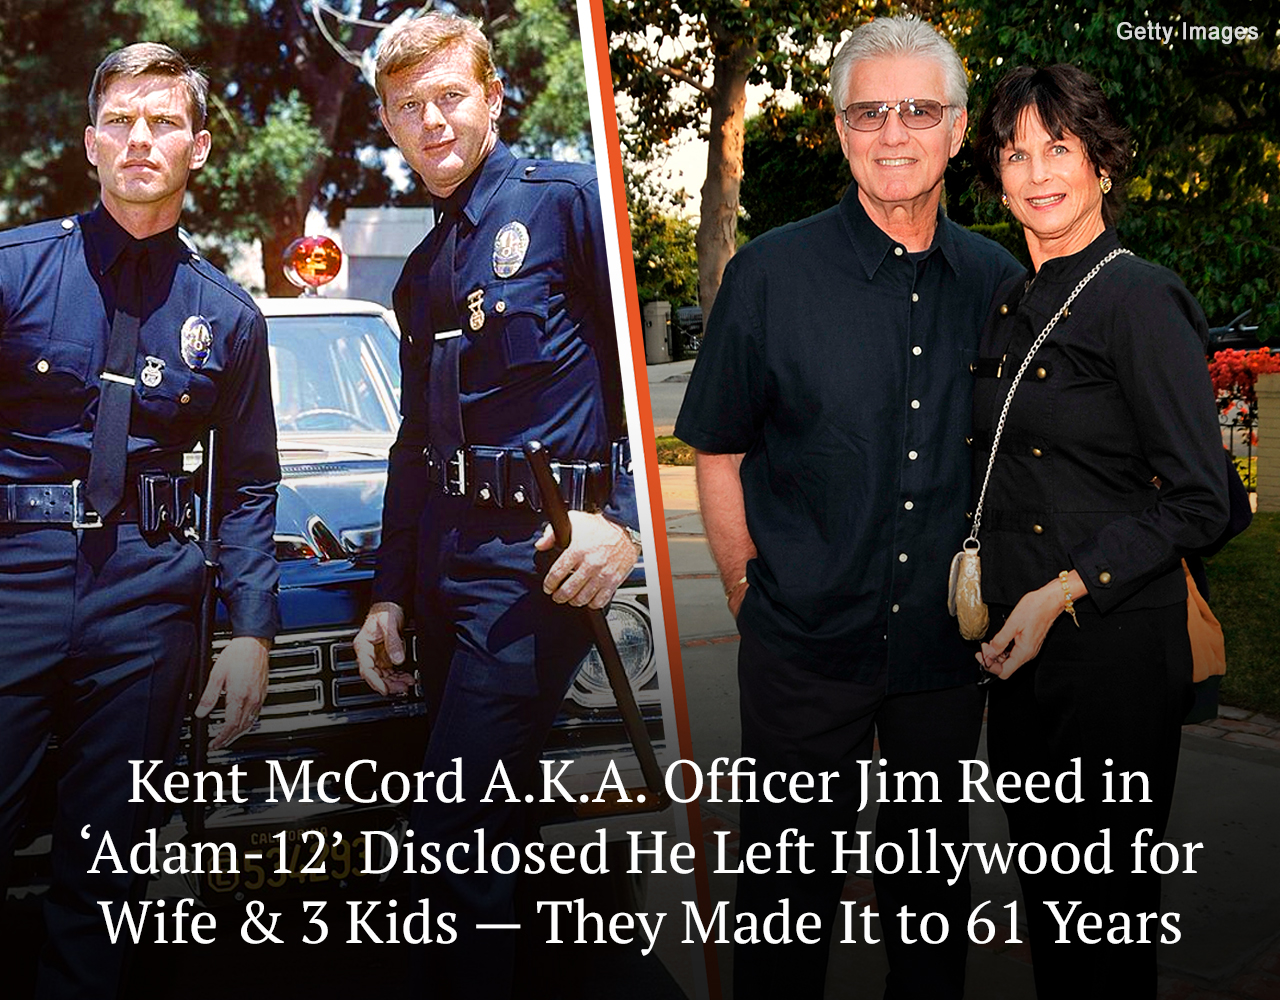 Kent McCord's heart was captured by his high school sweetheart, Cynthia ...